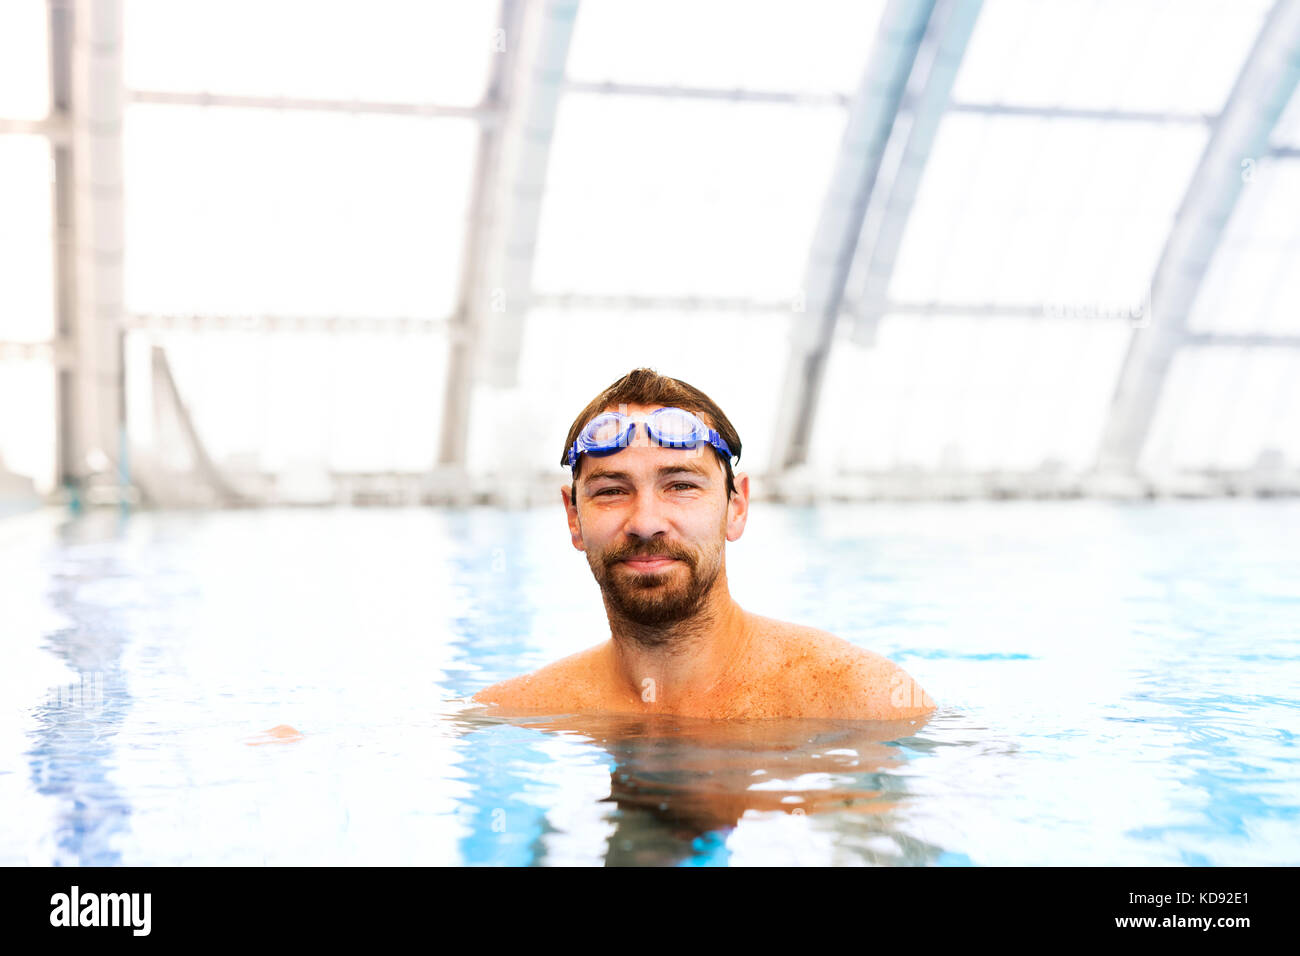 Man Swimming In An Indoor Swimming Pool Professional Swimmer